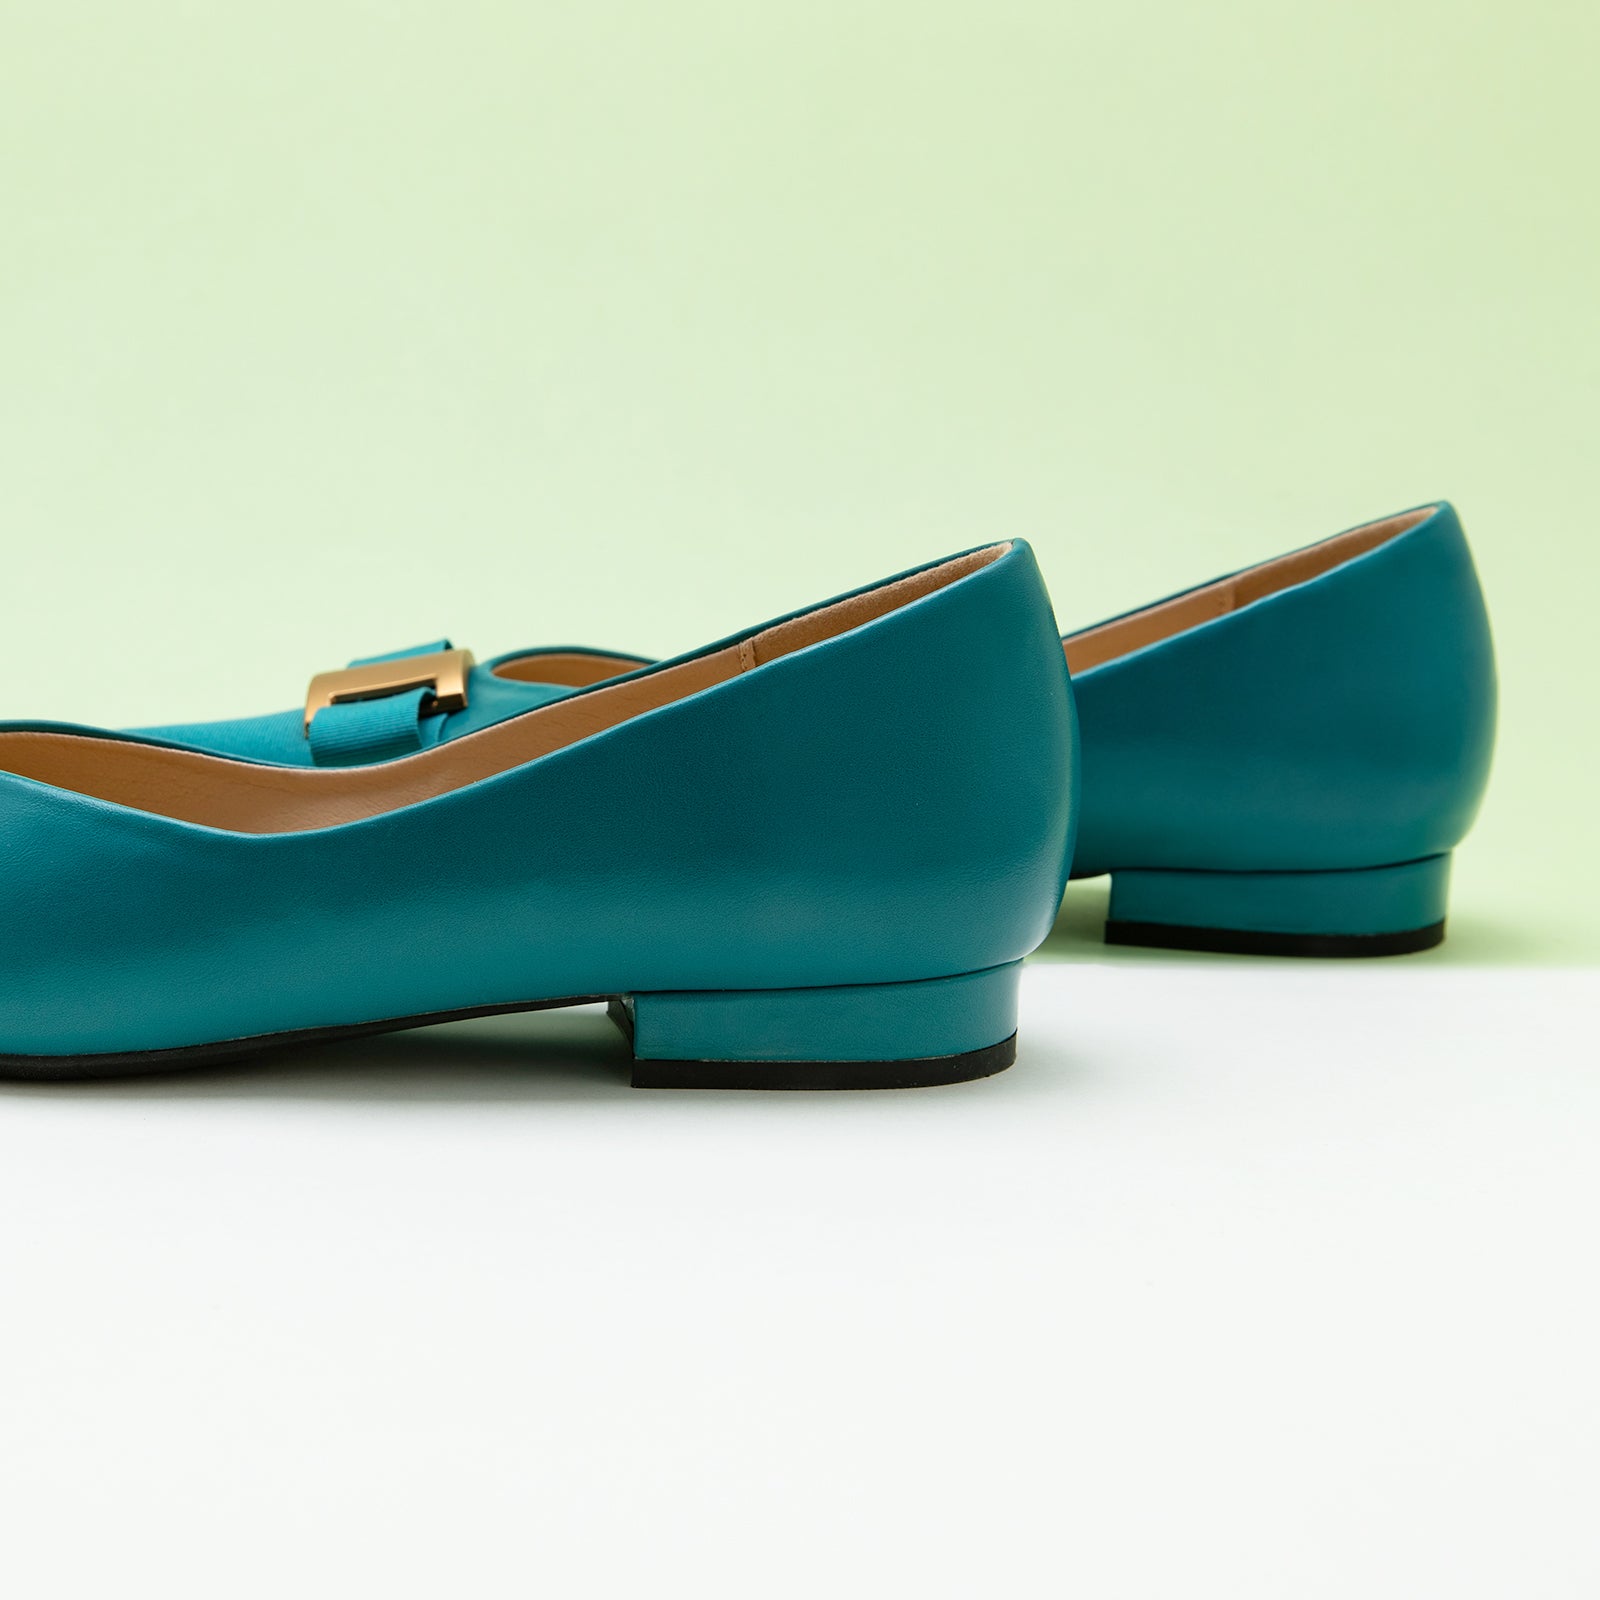 Embellished Leather Flats in Peacock Blue, providing a rich and vibrant touch to your ensemble